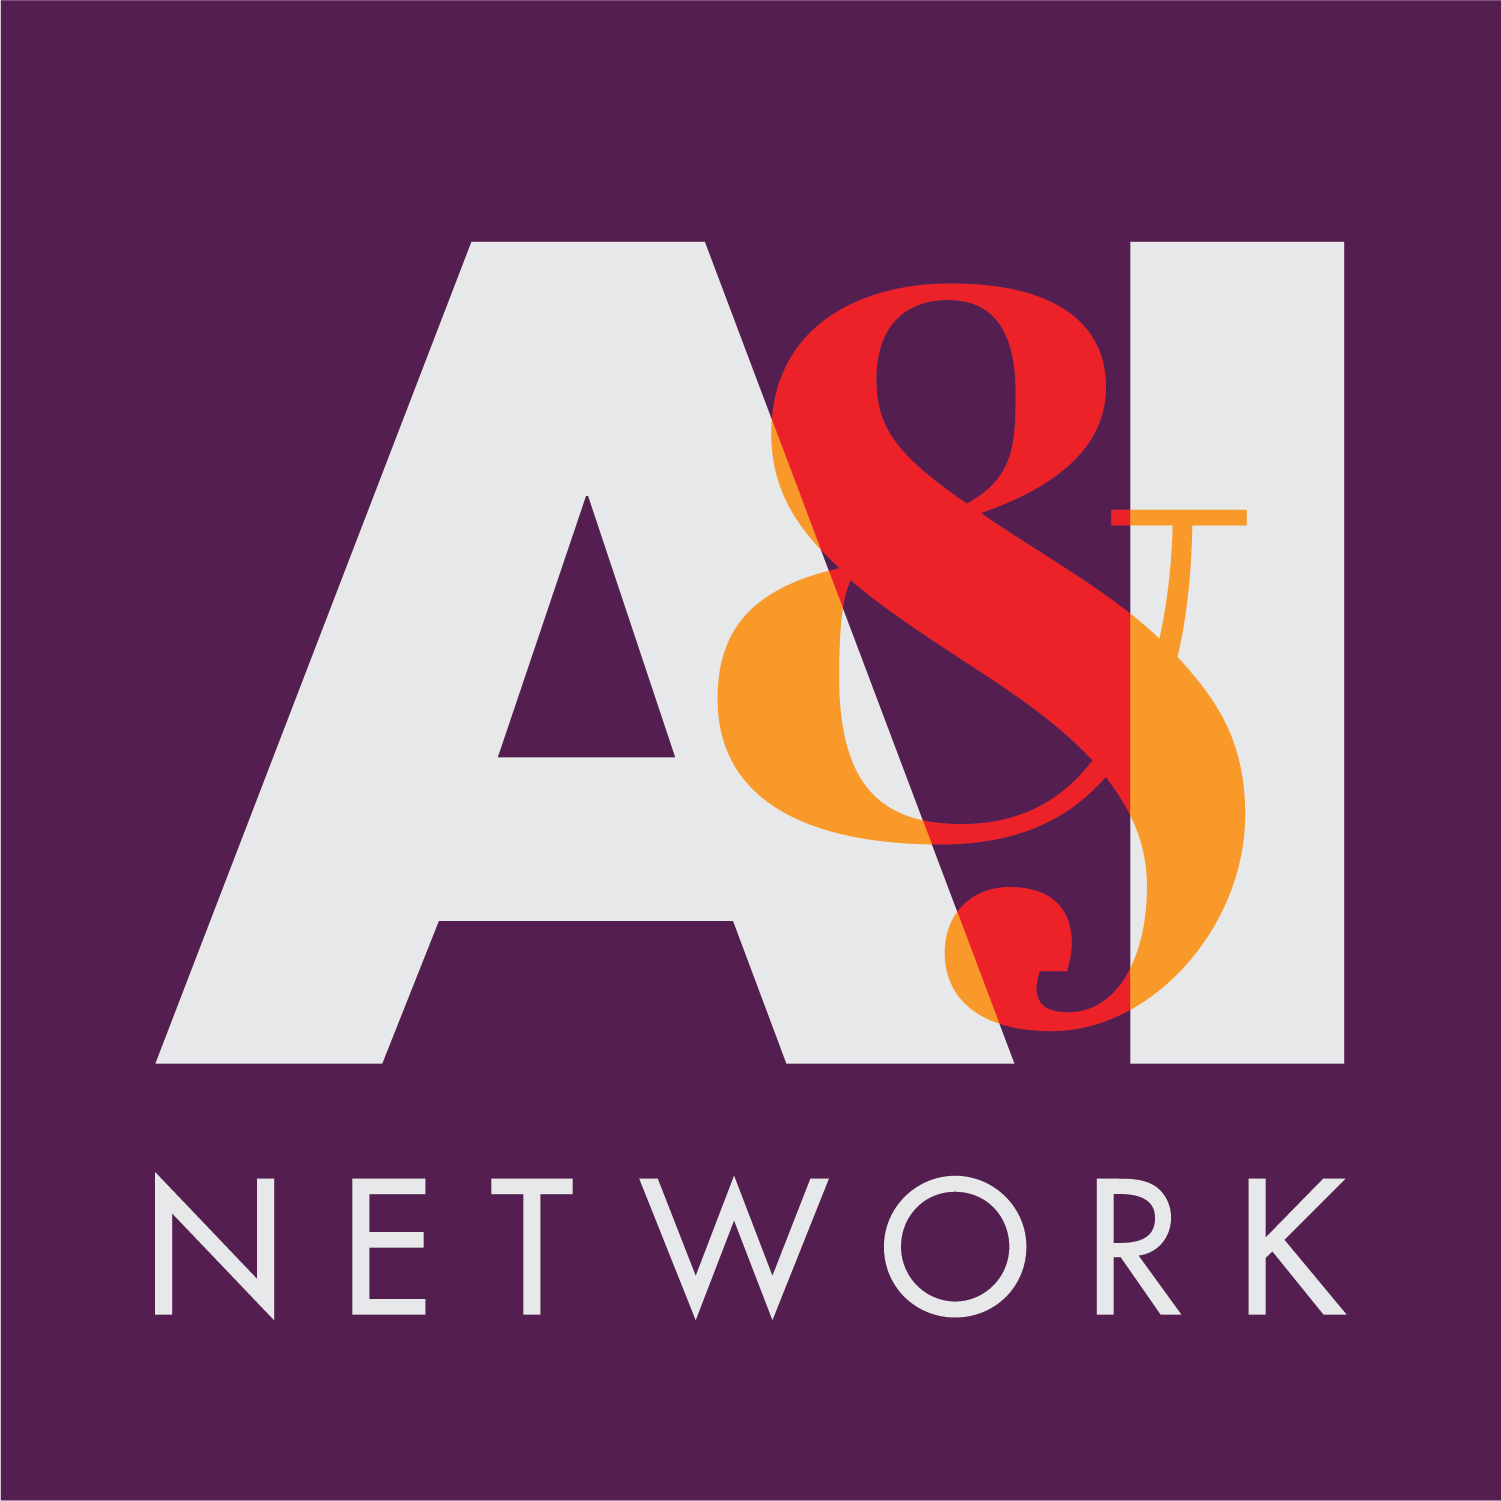 image of the Accessibility and Inclusion Network logo